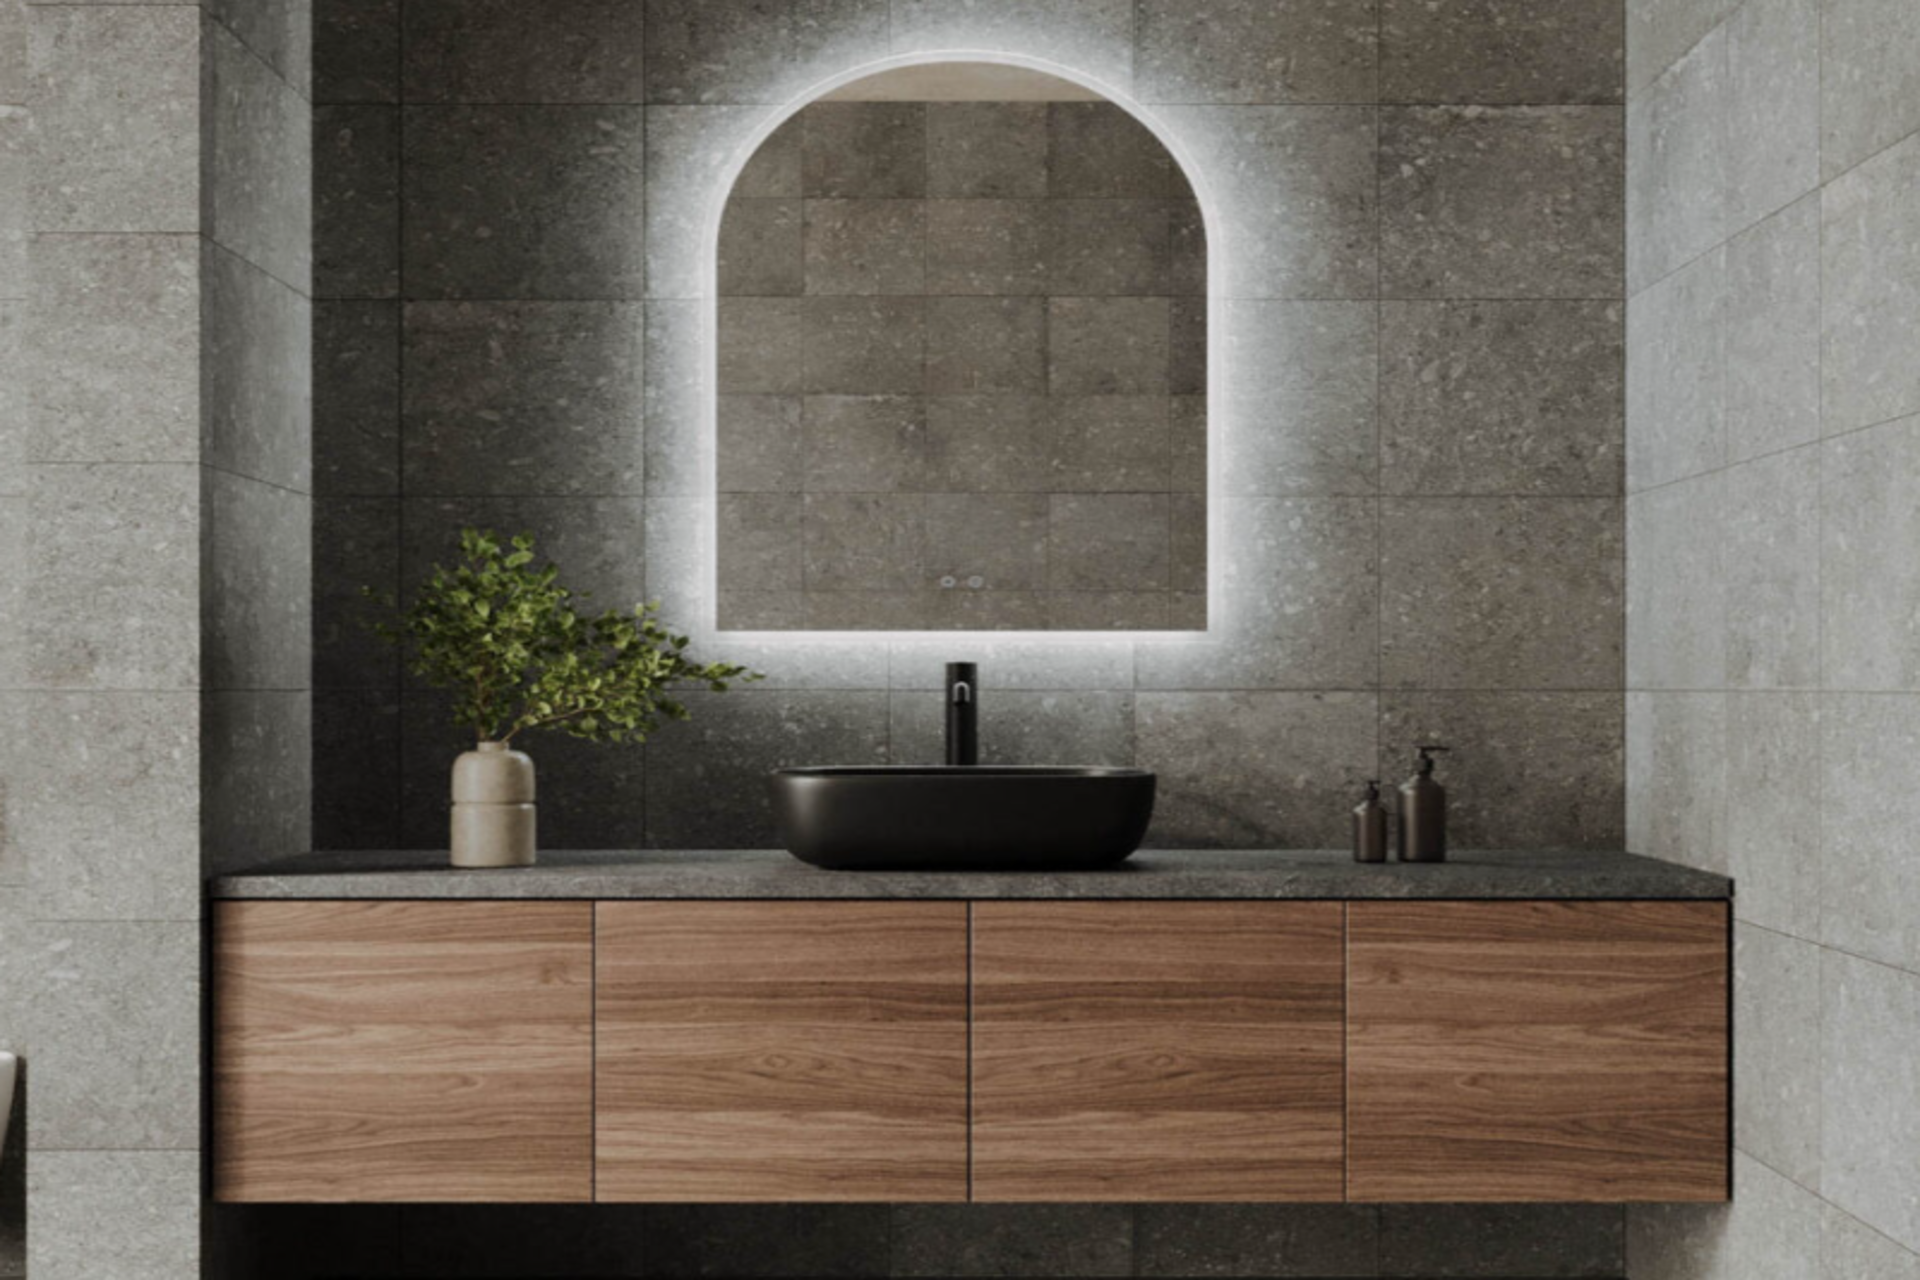 Arch Mirror: The Stylish Element to Use to Infuse the Bathroom with Elegance